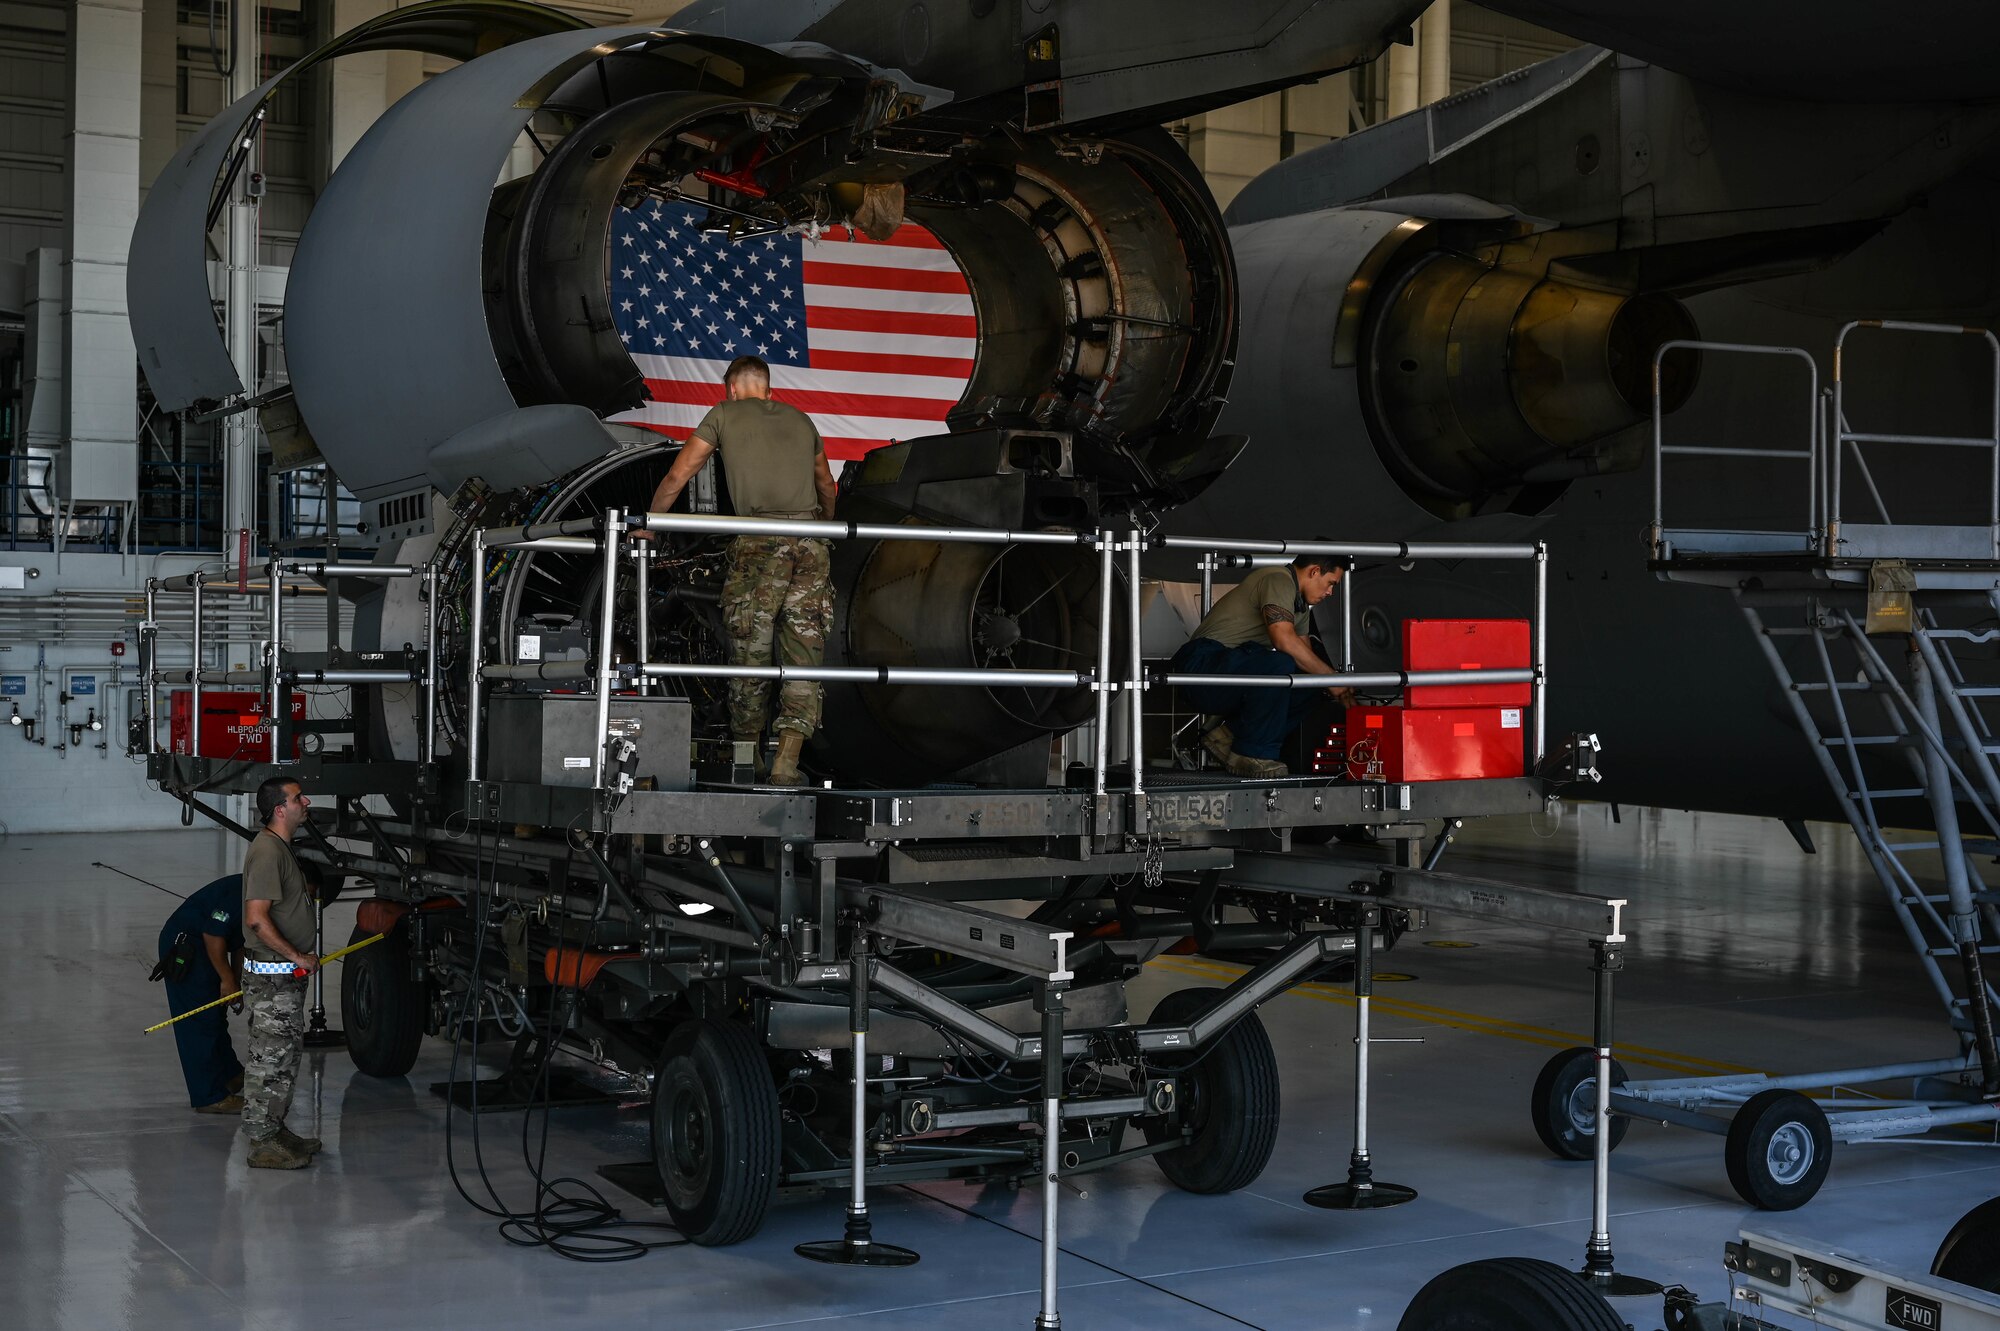 Airmen assigned to the 15th Maintenance Group and 154th Aircraft Maintenance Squadron prepare a C-17 Globemaster III turbofan engine for an engine swap in Hangar 19 on Joint Base Pearl Harbor-Hickam, Hawaii, Feb. 23, 2022. Airmen from the 15th MXG and 154th AMXS execute total force integration by working together to carry out the mission.  (U.S. Air Force photo by Staff Sgt. Alan Ricker)